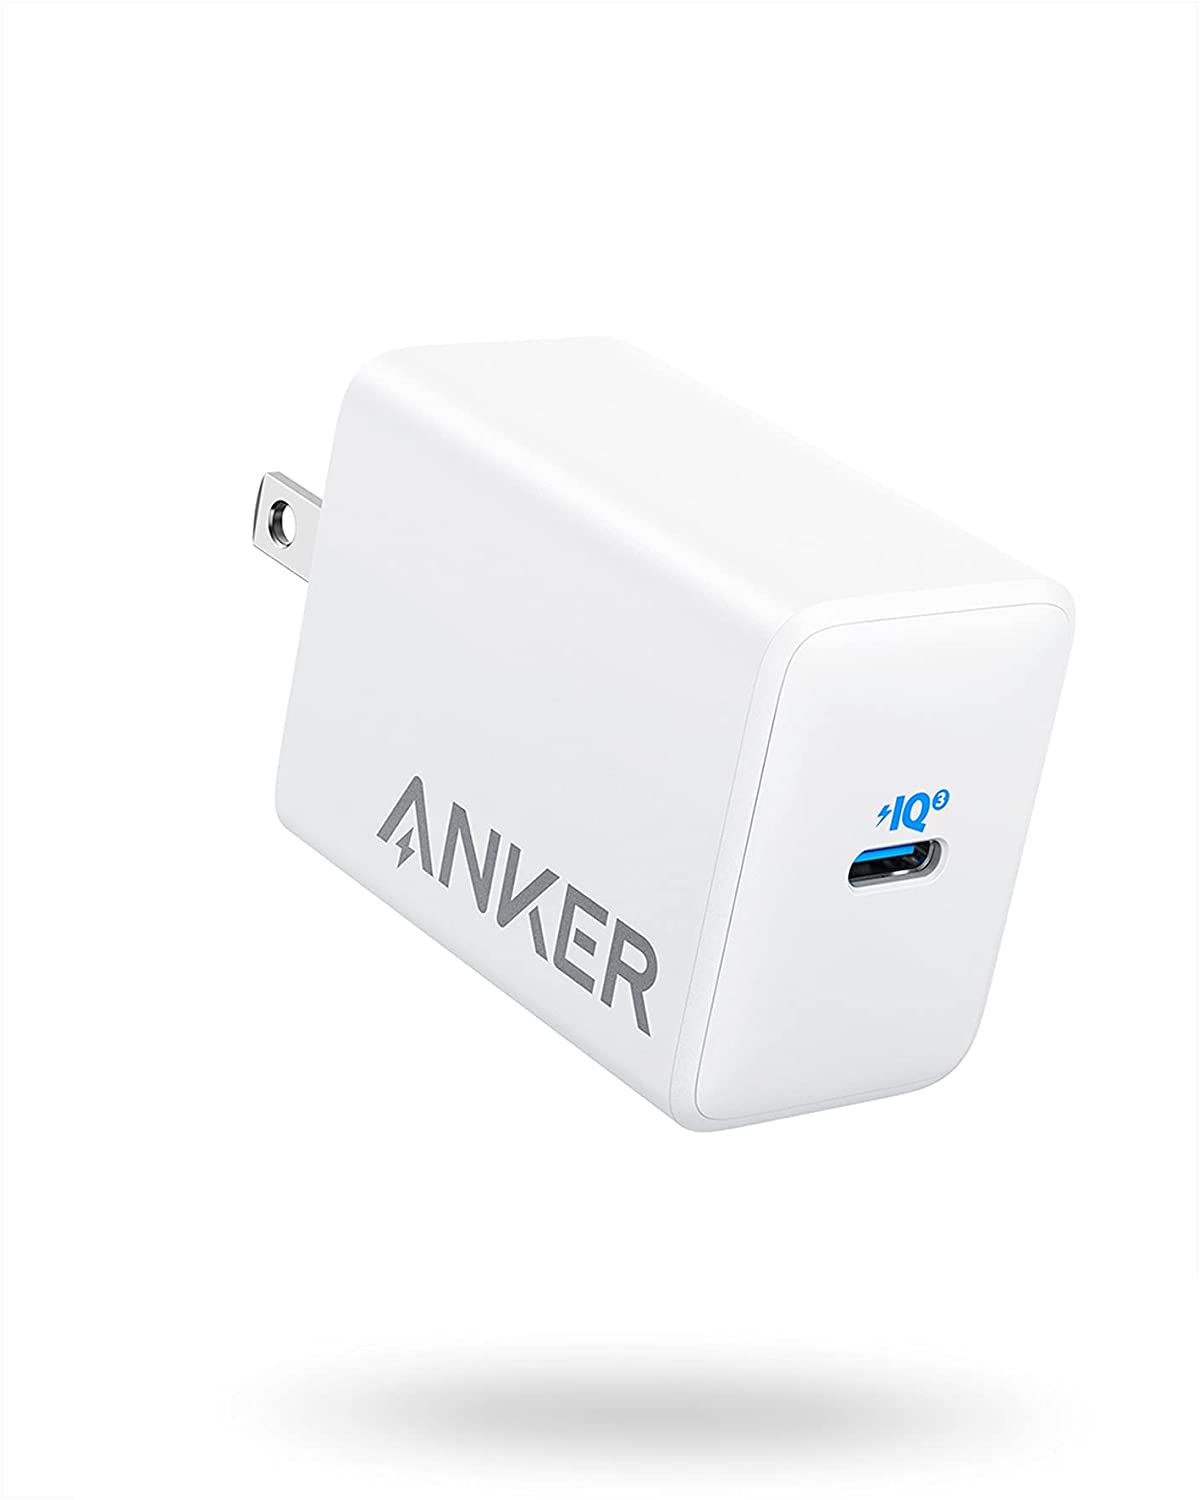 Anker PPS charger